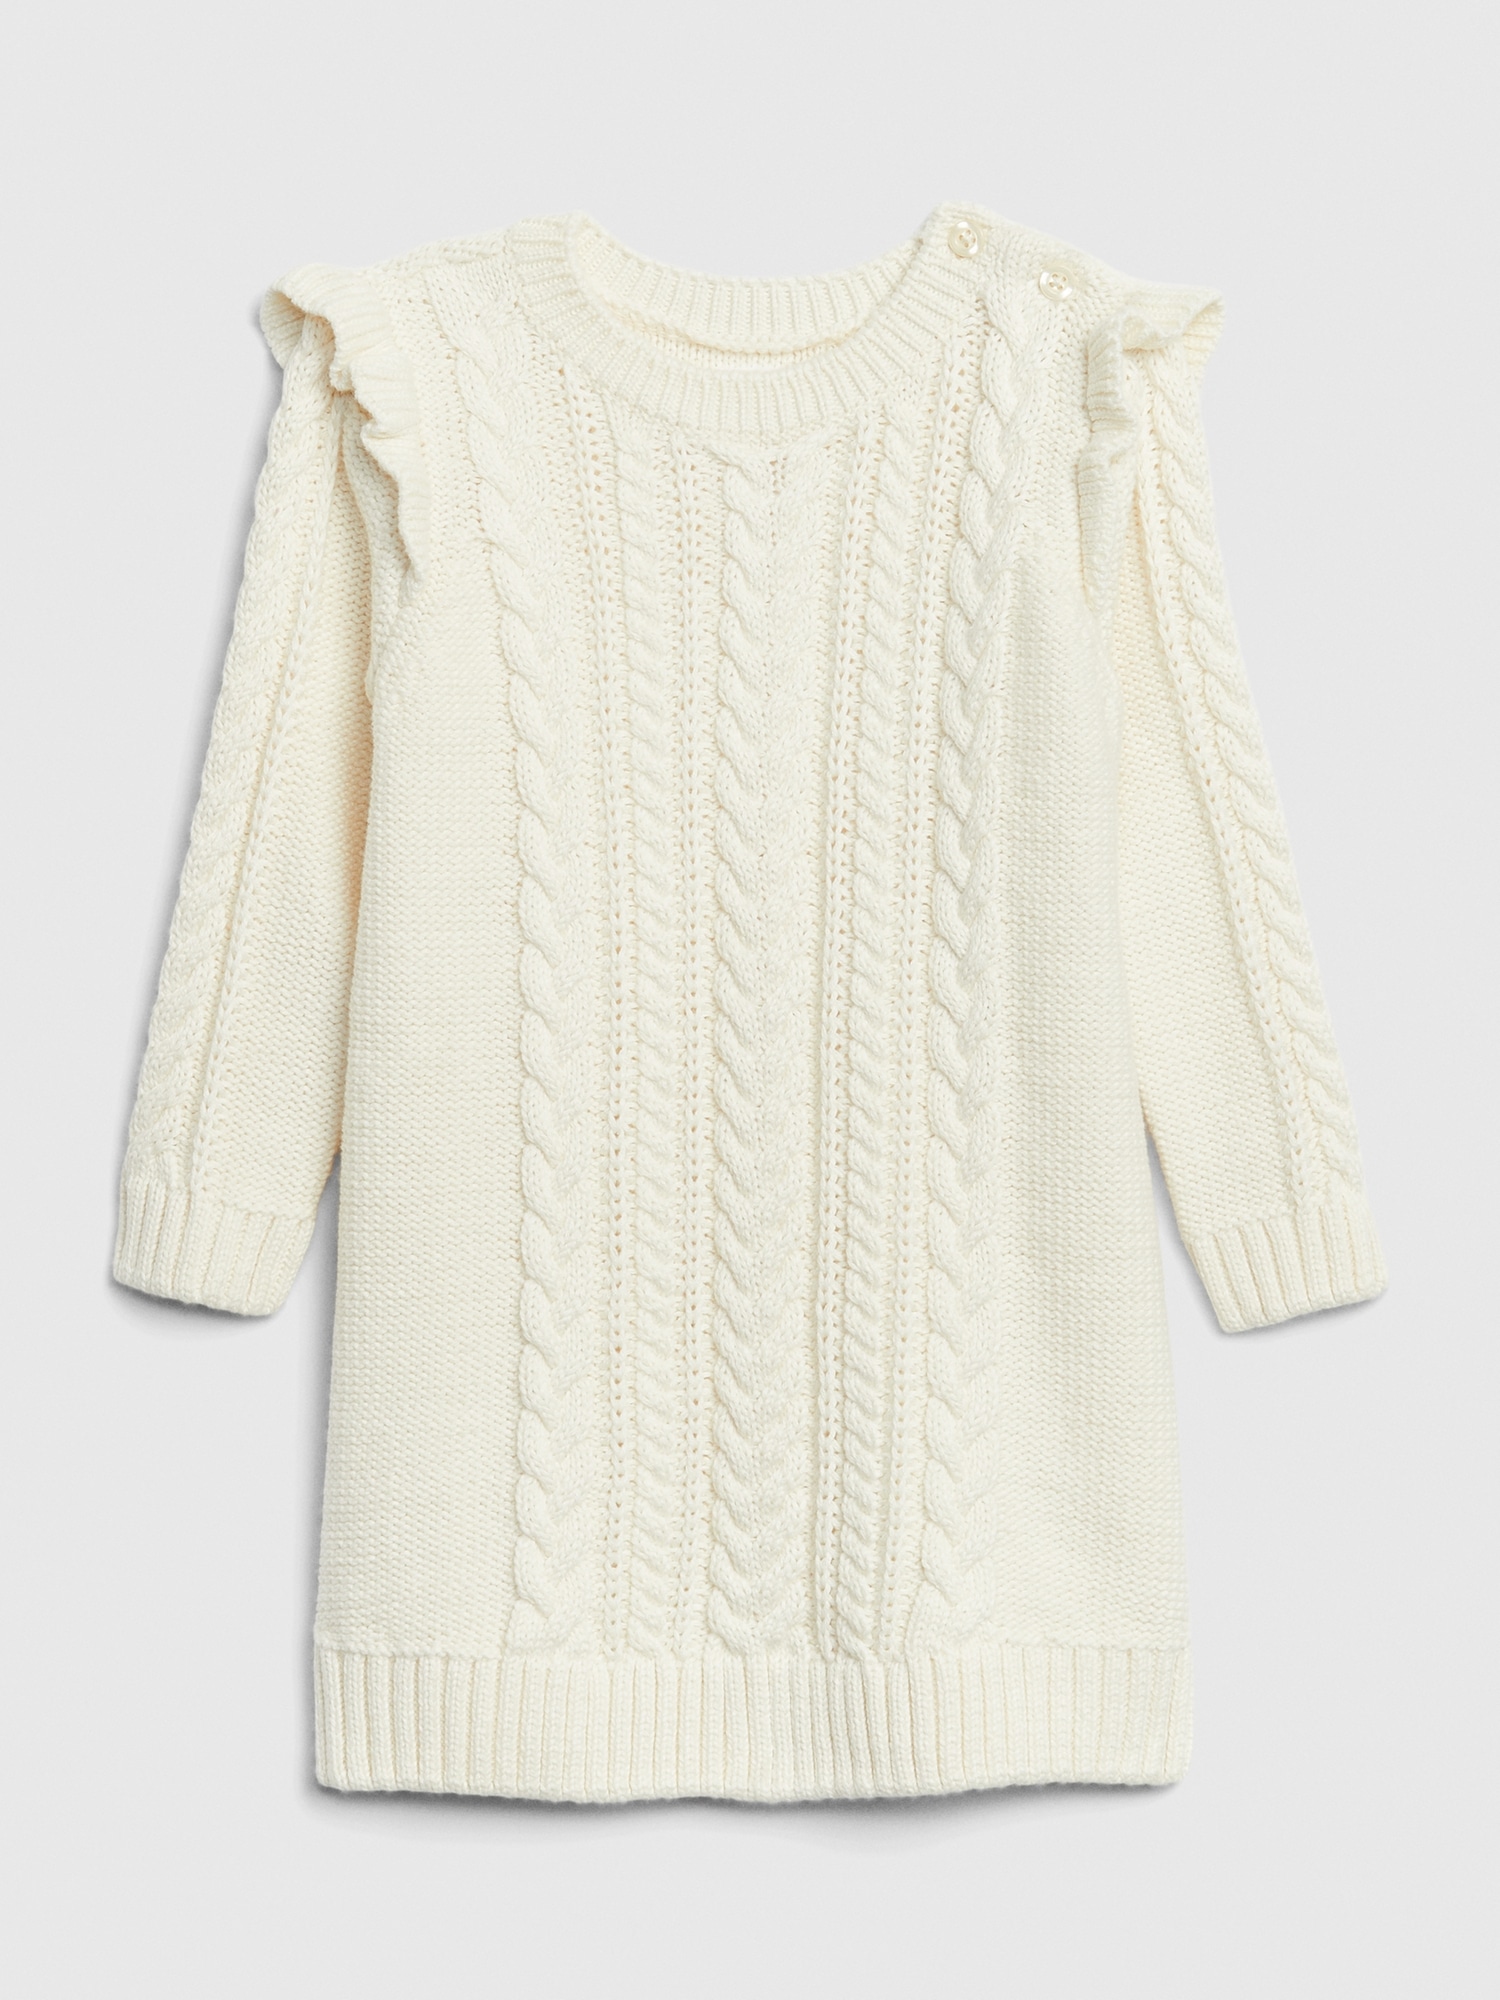 Baby Cable Knit Sweater Dress | Gap